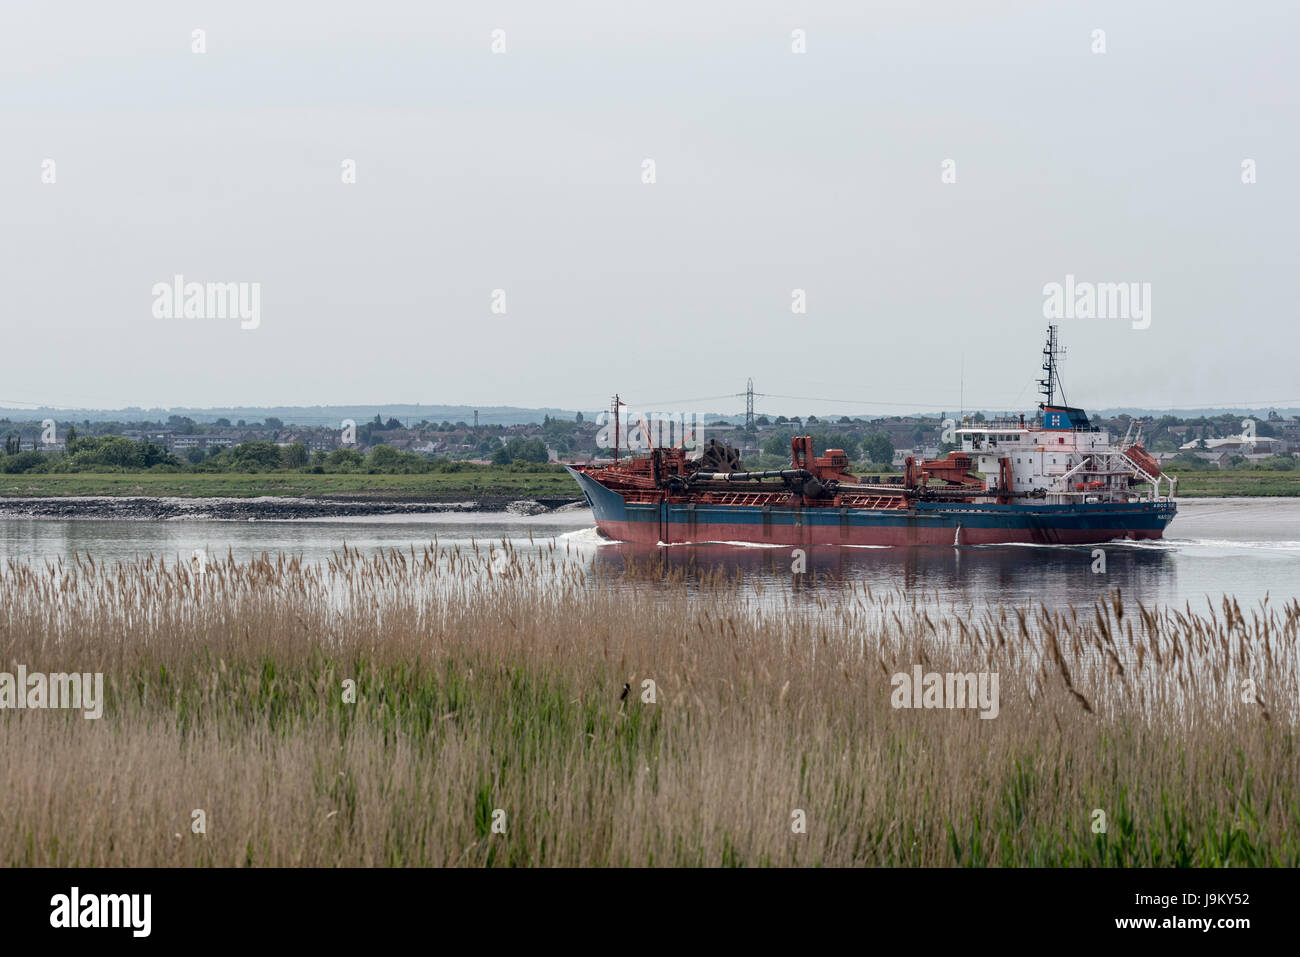 A dredger on the River Thames Stock Photo